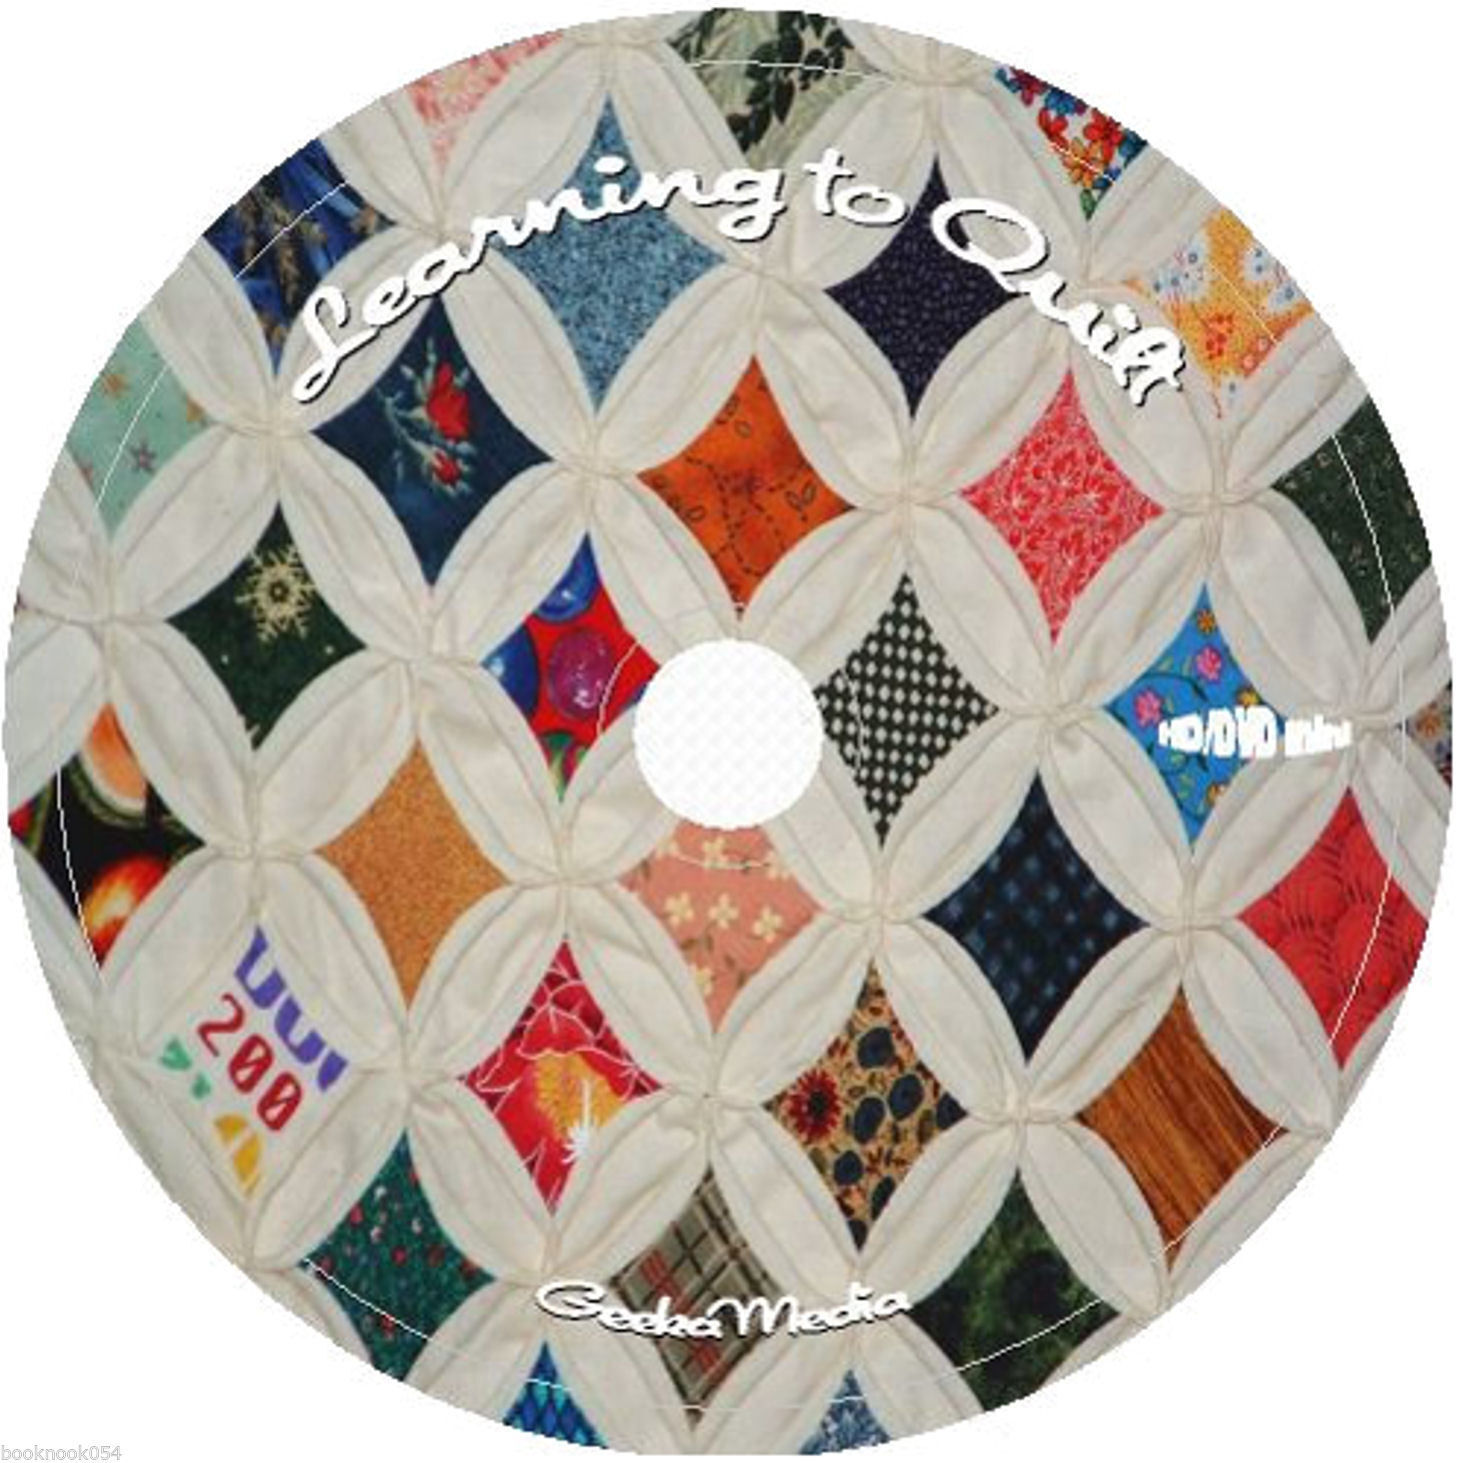 Learning to Quilt for the Beginner Books & Video Tutorials on DVD easy at home